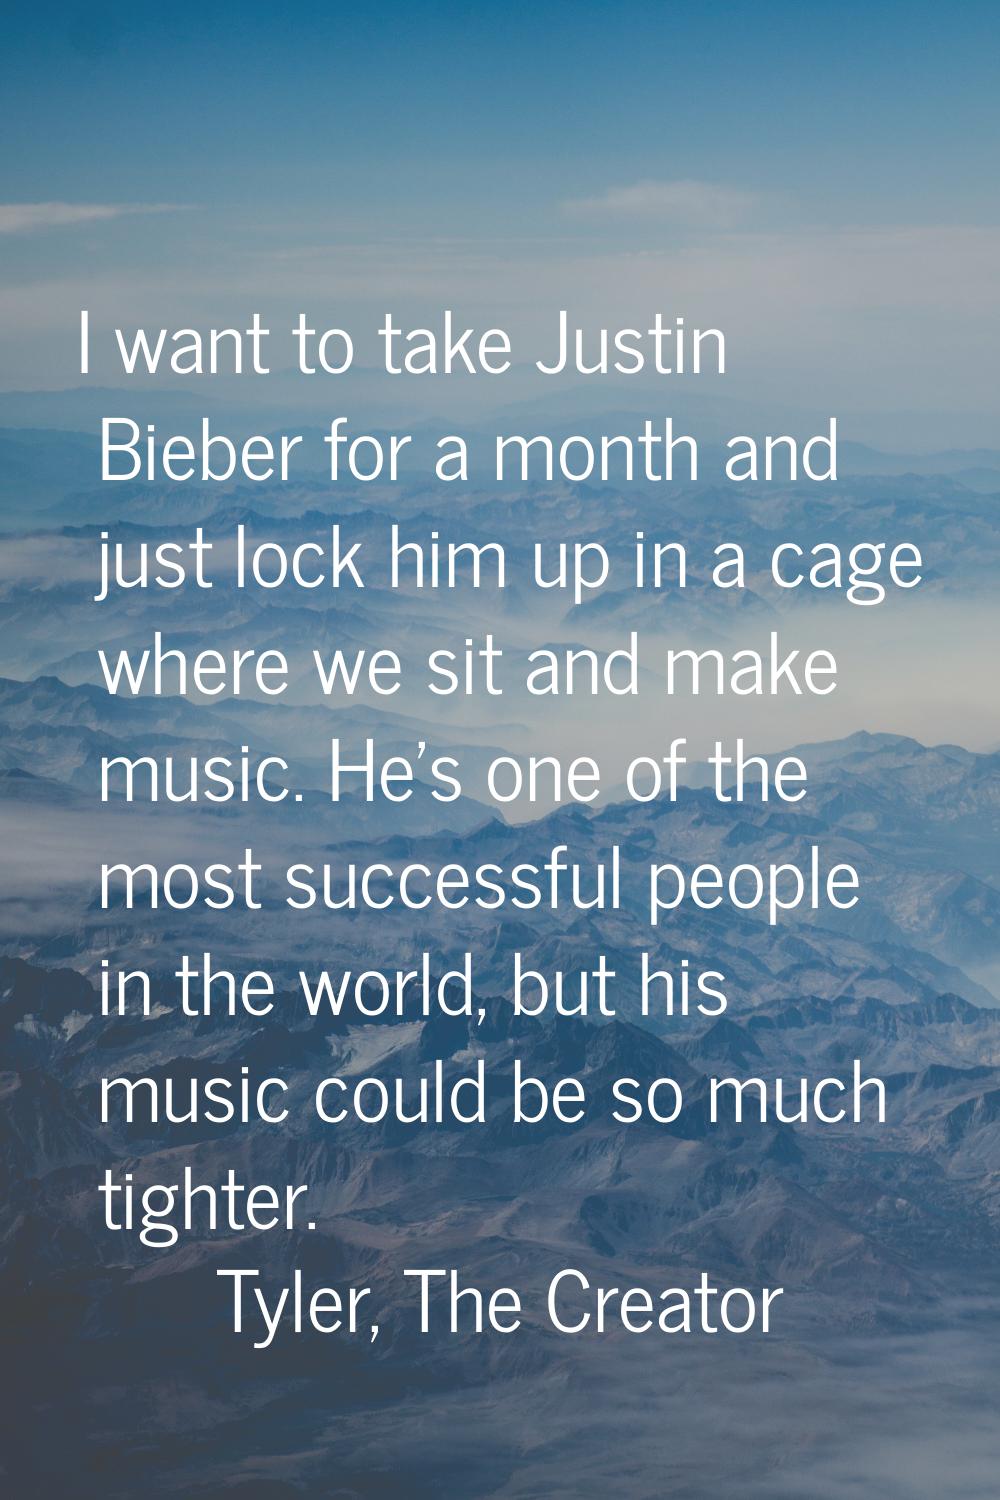 I want to take Justin Bieber for a month and just lock him up in a cage where we sit and make music